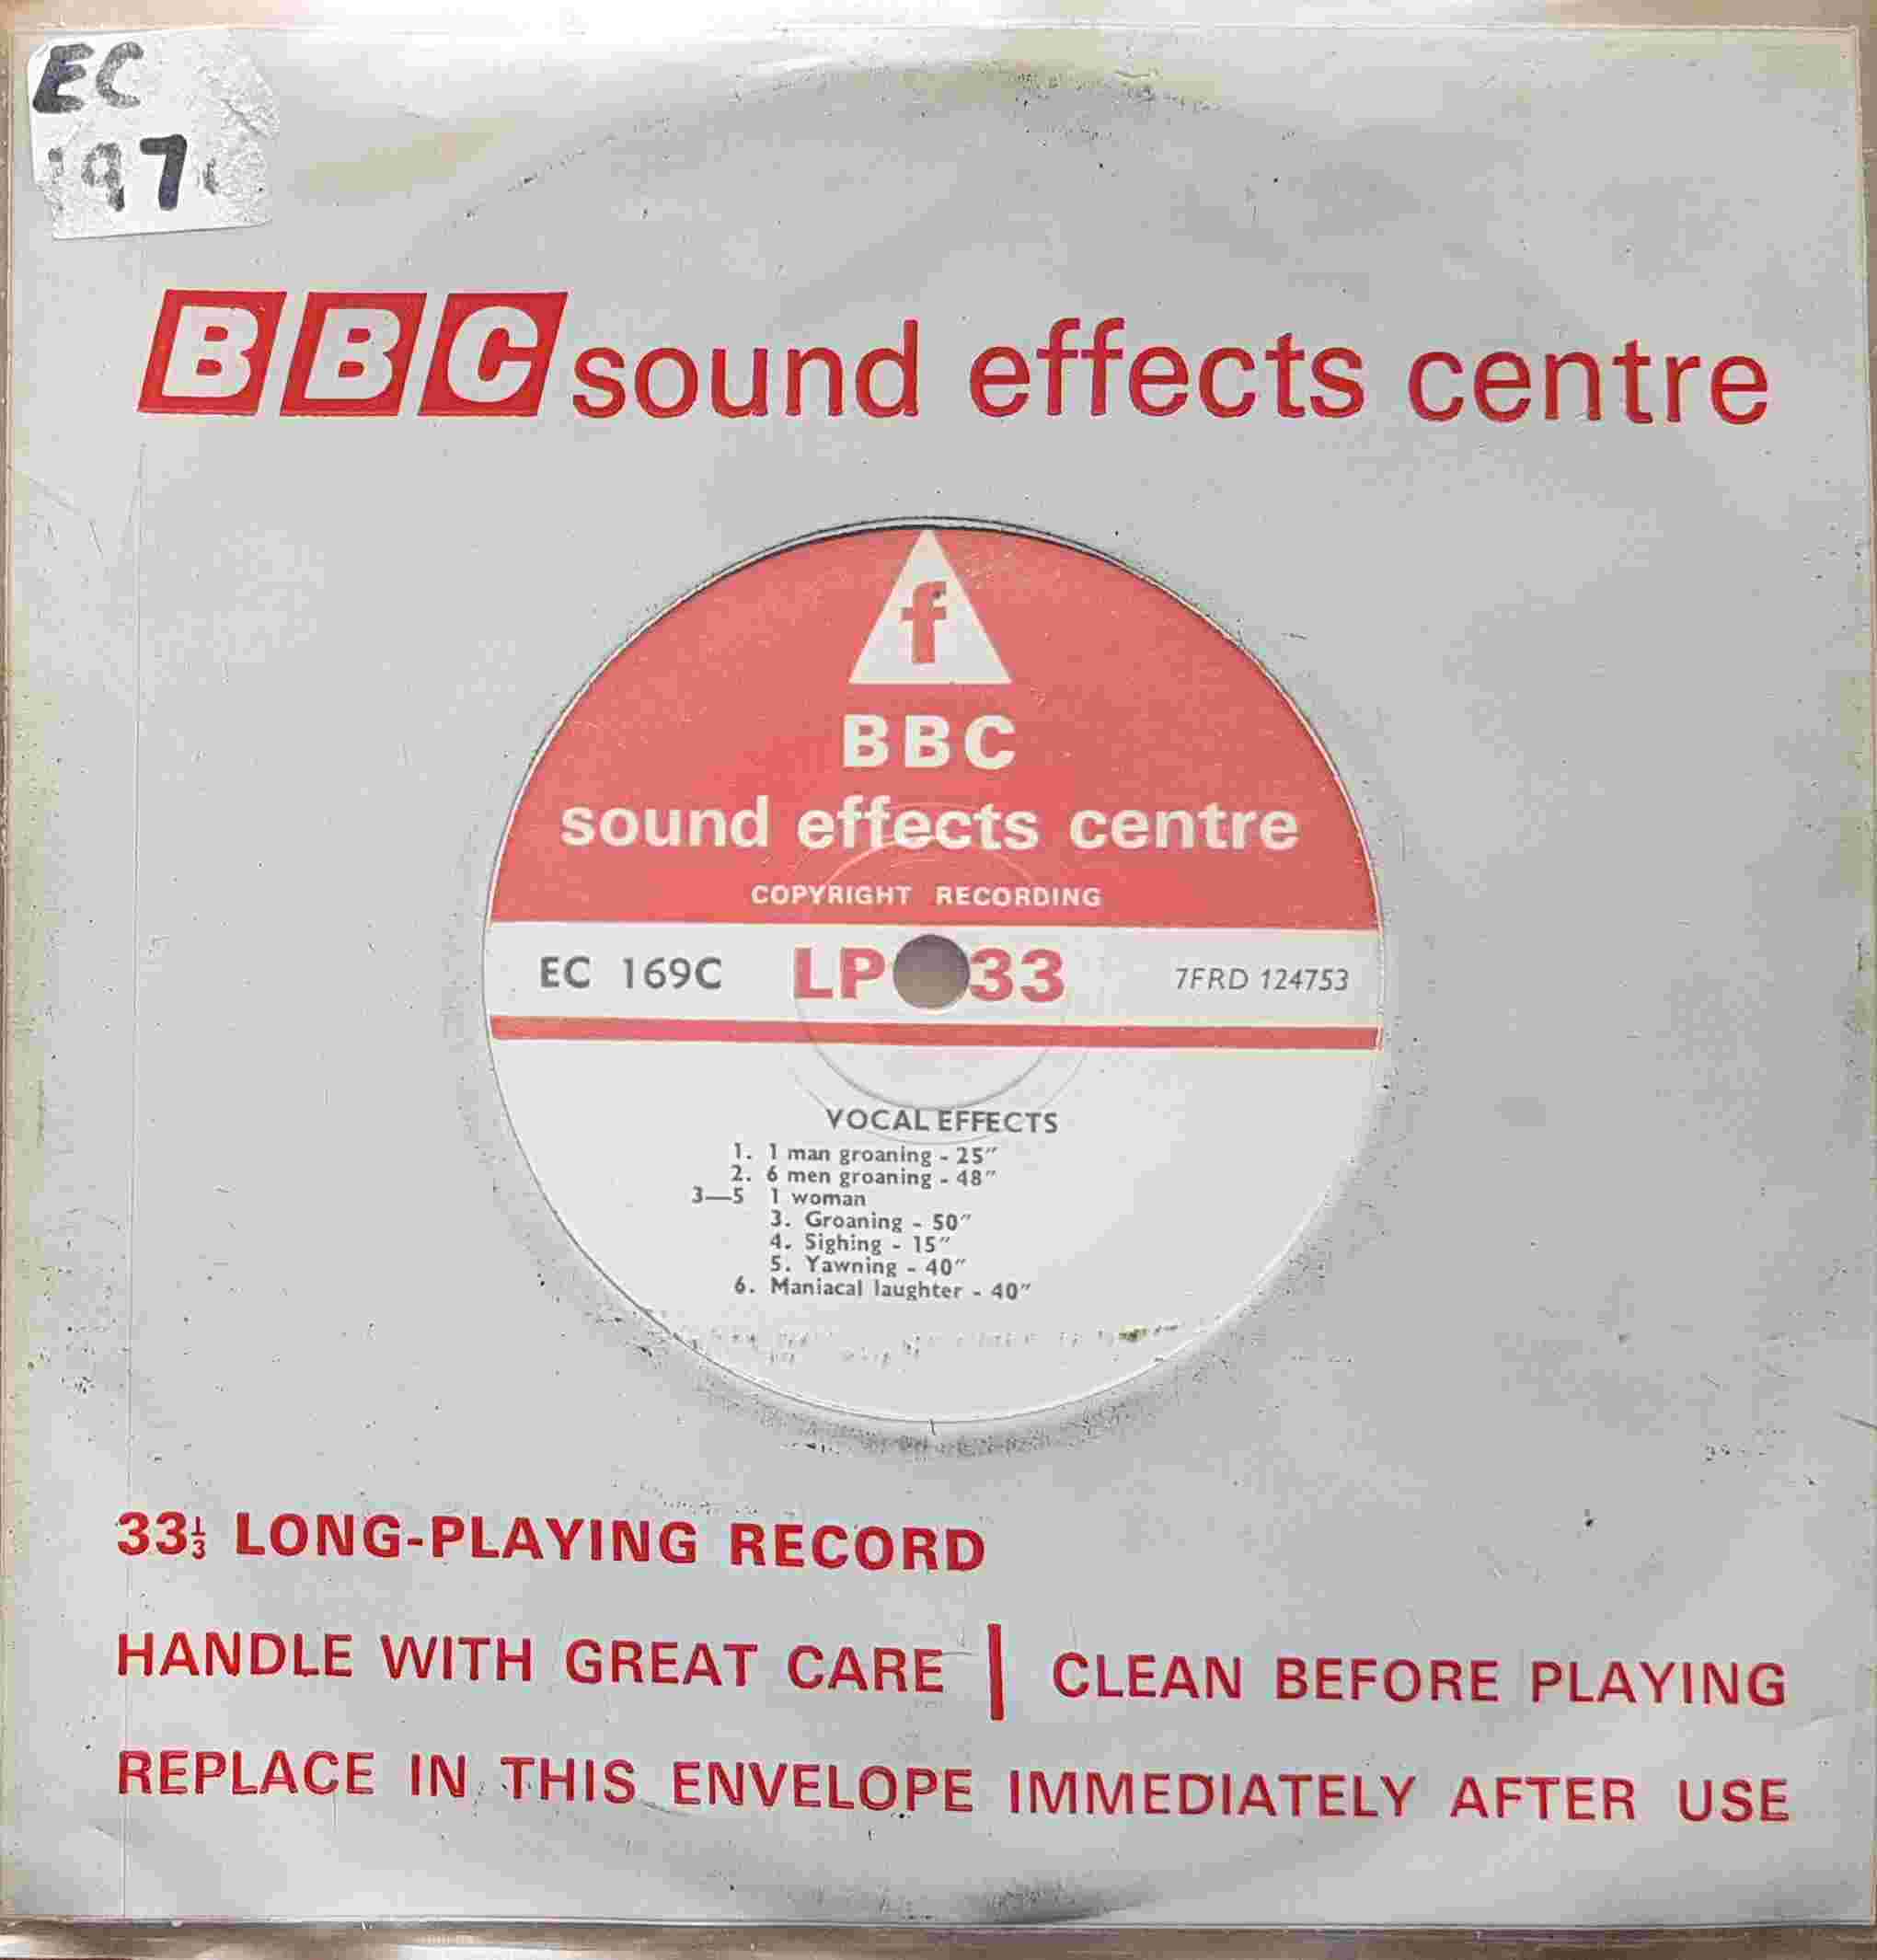 Picture of EC 169C Vocal effects / Vocal & heart effects by artist Not registered from the BBC singles - Records and Tapes library